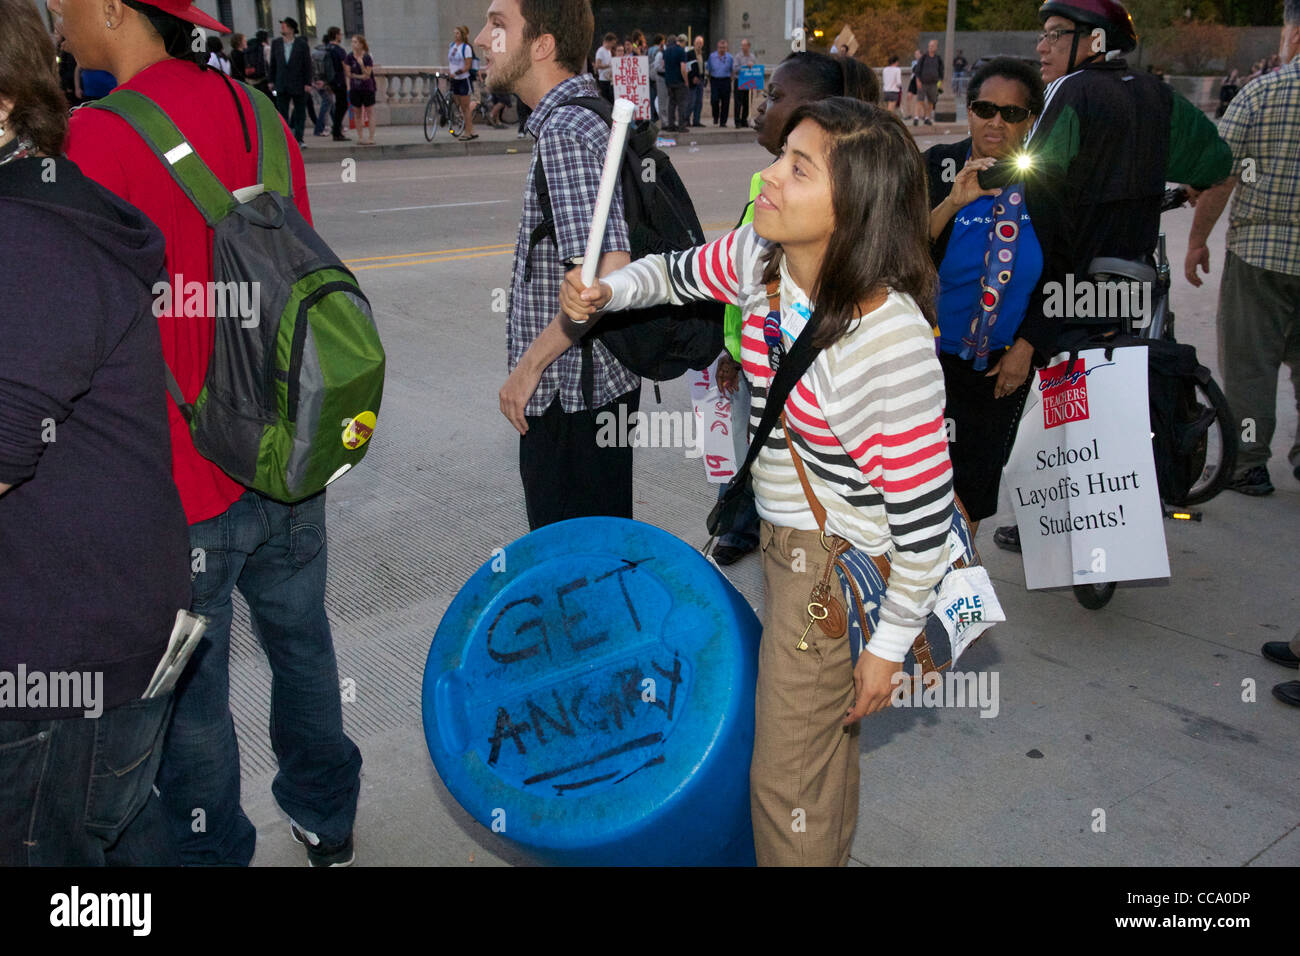 Chicago occupent les manifestants. Take Back Chicago rally. Le 10 octobre 2011. Banque D'Images